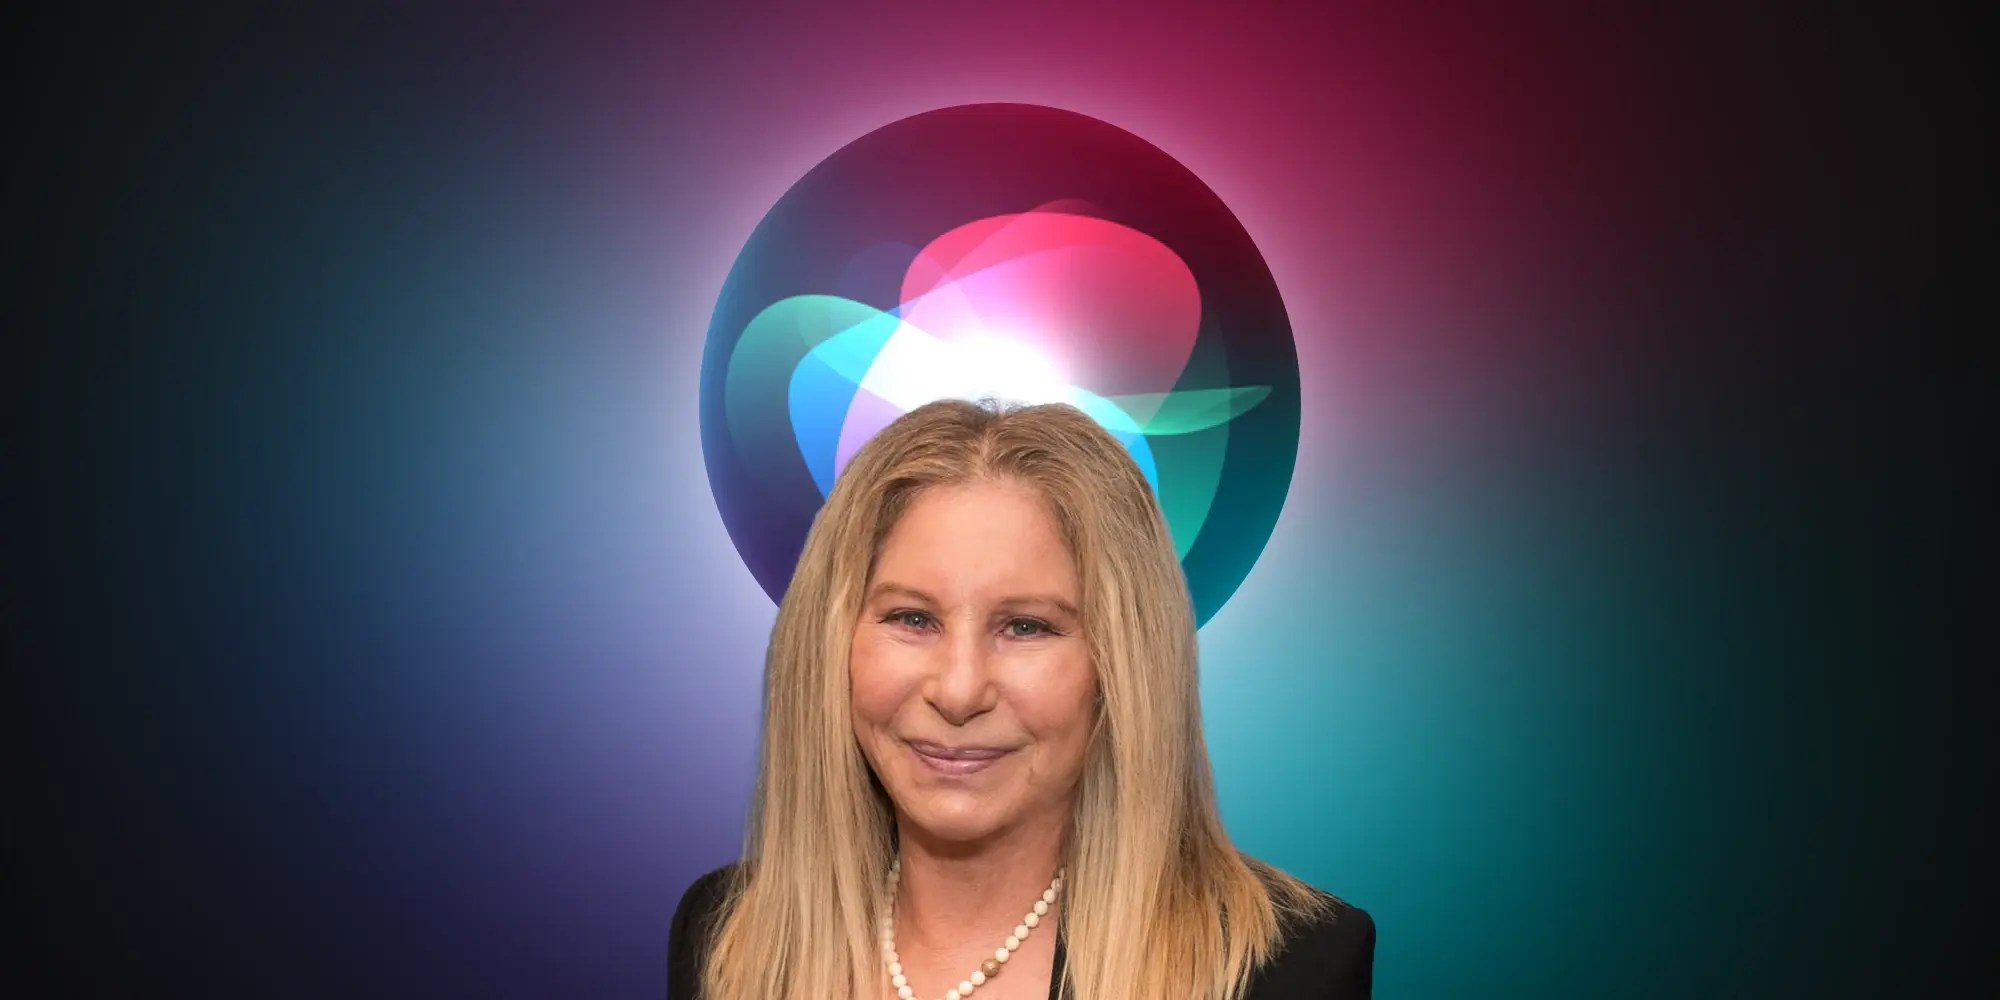 Barbra Streisand contacted Tim Cook over Apple's name pronunciation, Entertainment